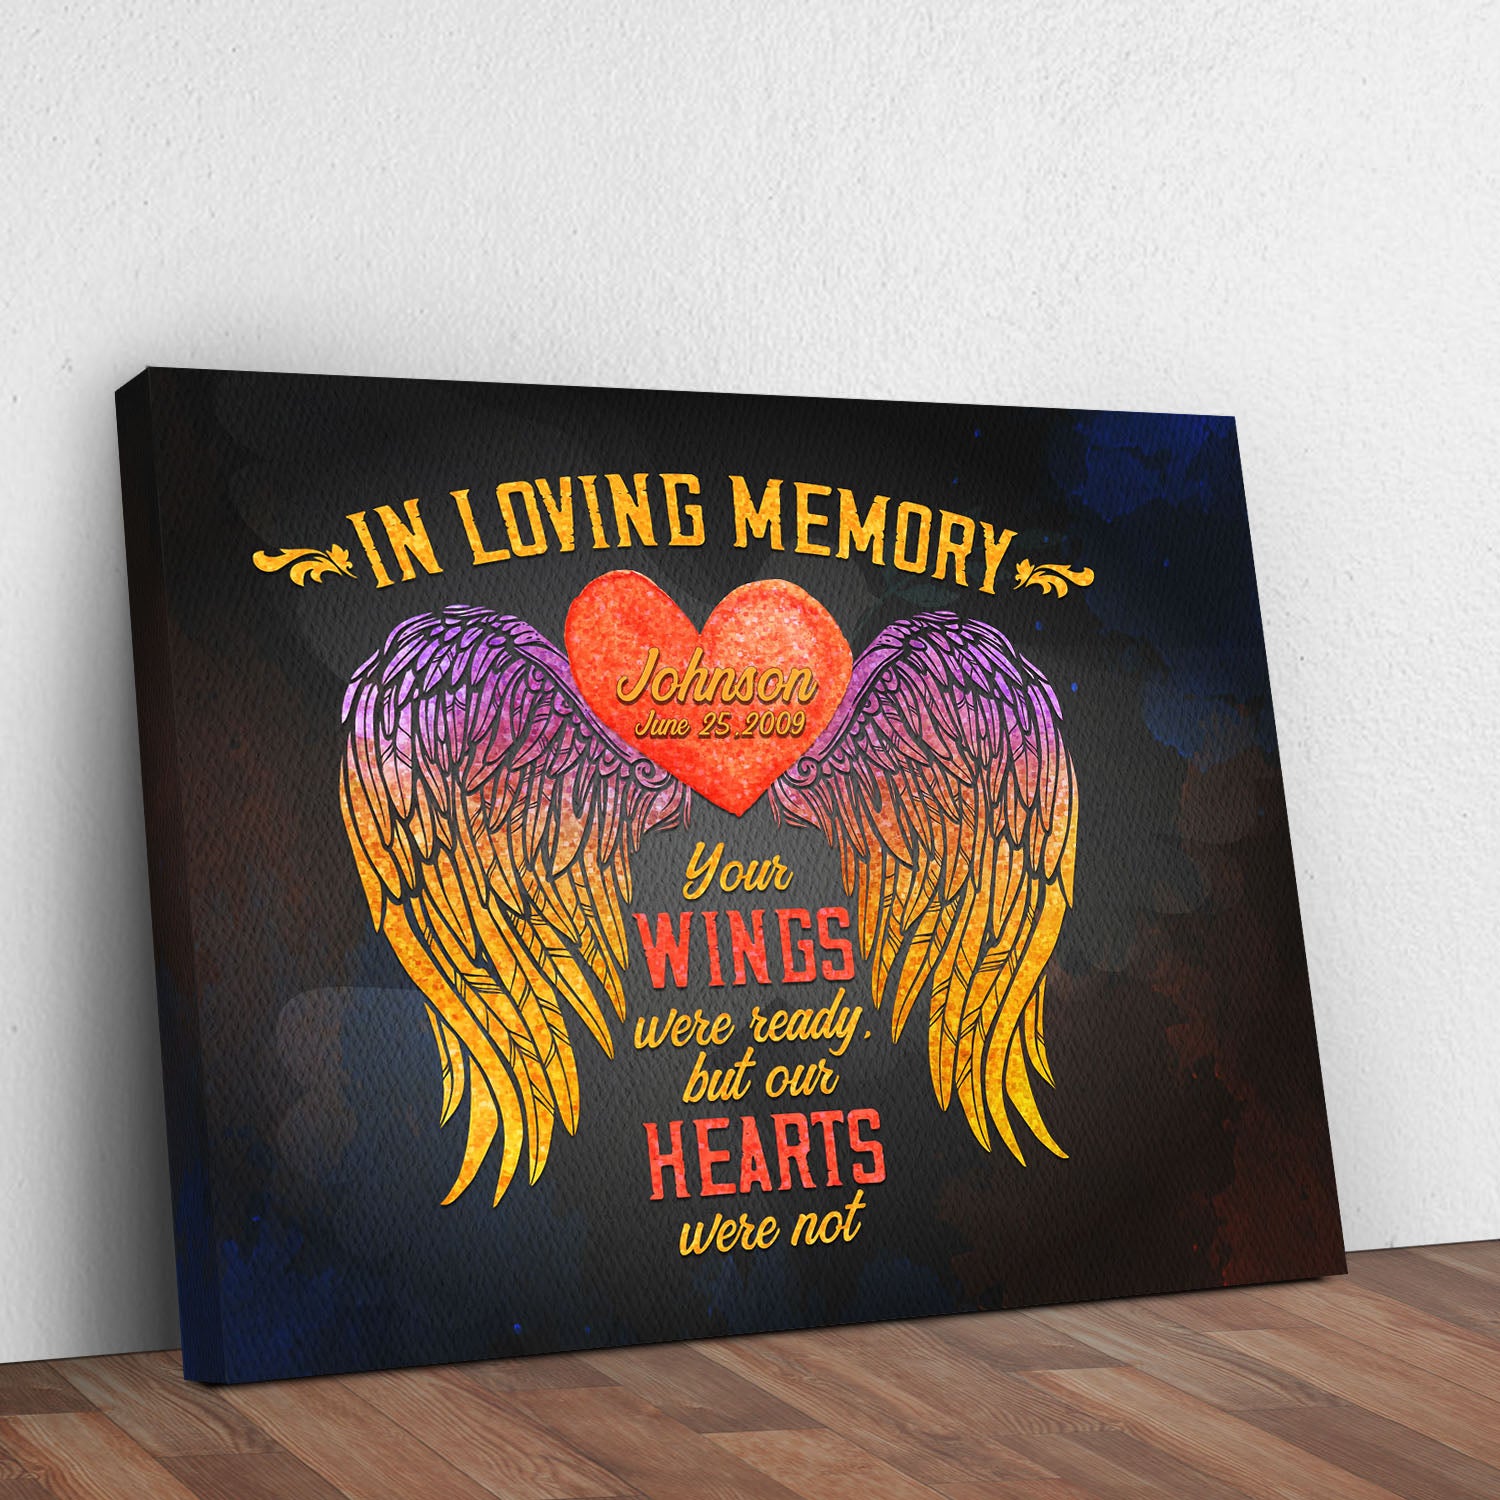 In Loving Memory Sign - Image by Tailored Canvases